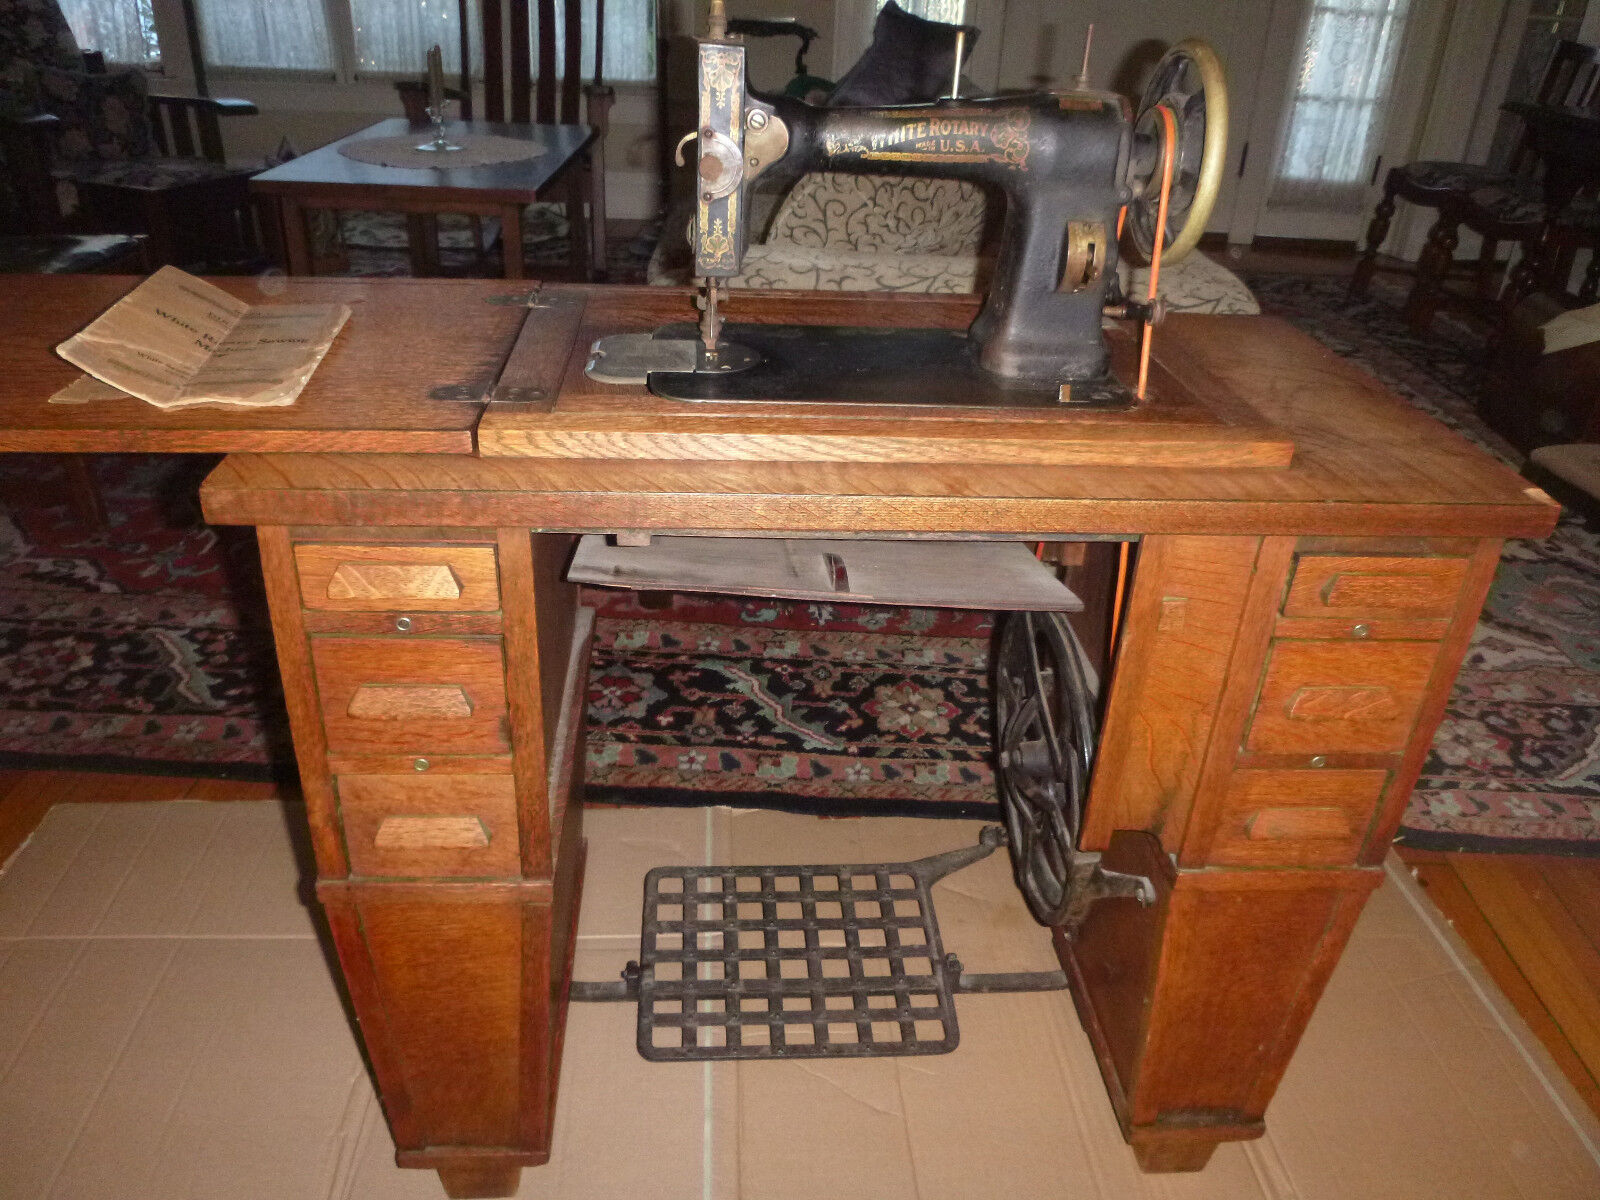 WHITE CO. ROTARY TREADLE SEWING MACHINE IN CRAFTSMAN CABINET-1913 ERA IS WORKING